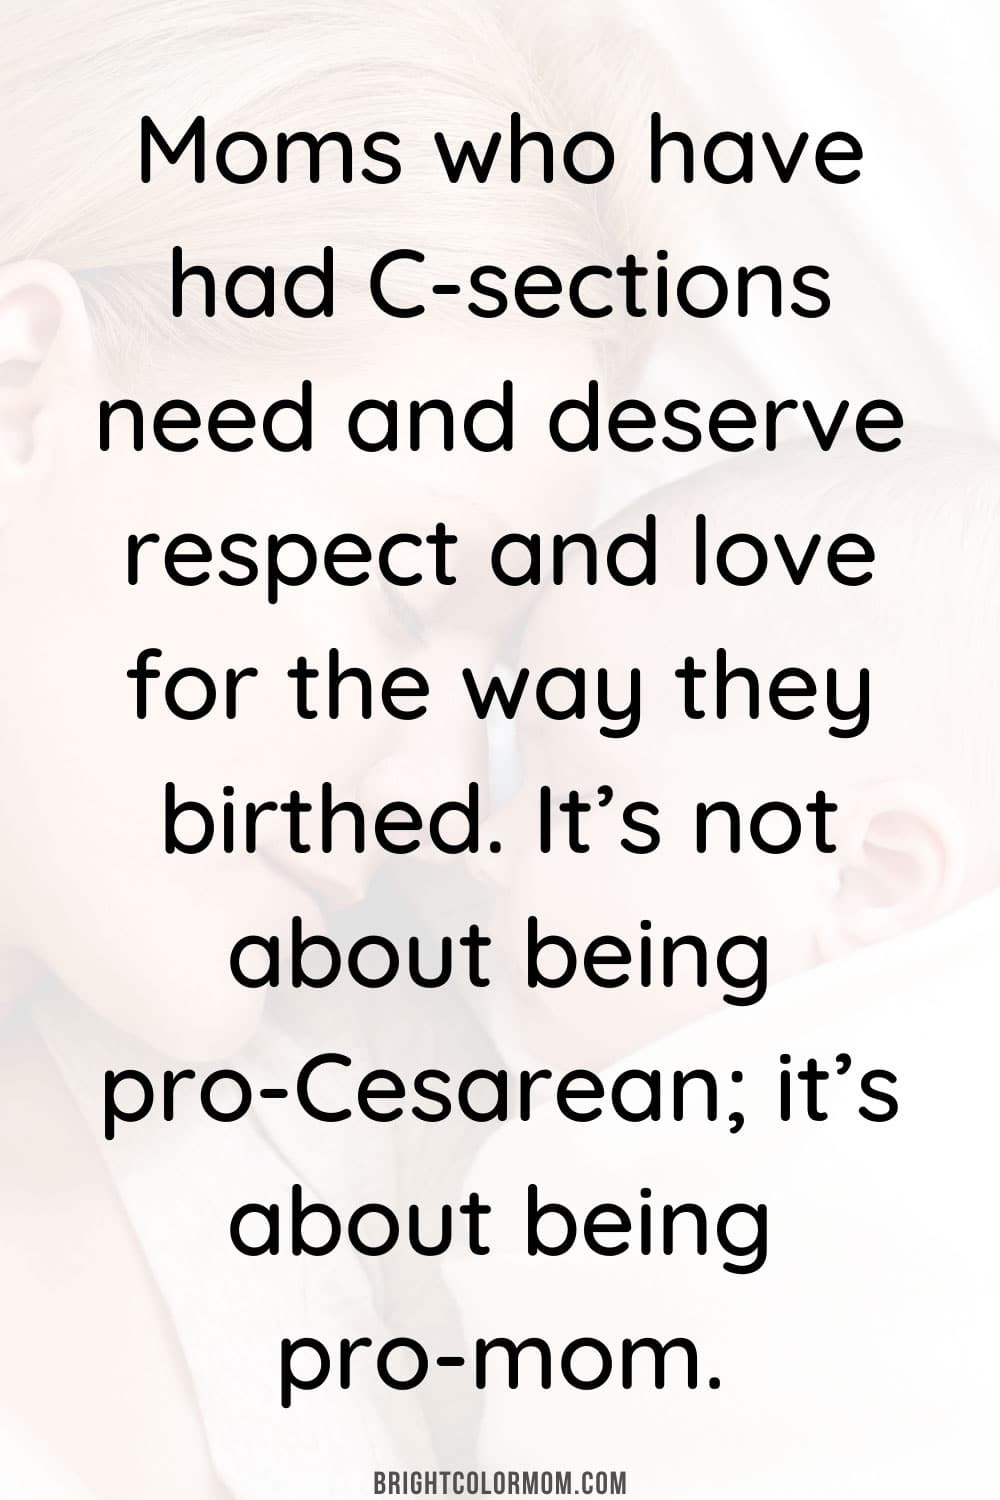 Moms who have had C-sections need and deserve respect and love for the way they birthed. It’s not about being pro-Cesarean; it’s about being pro-mom.